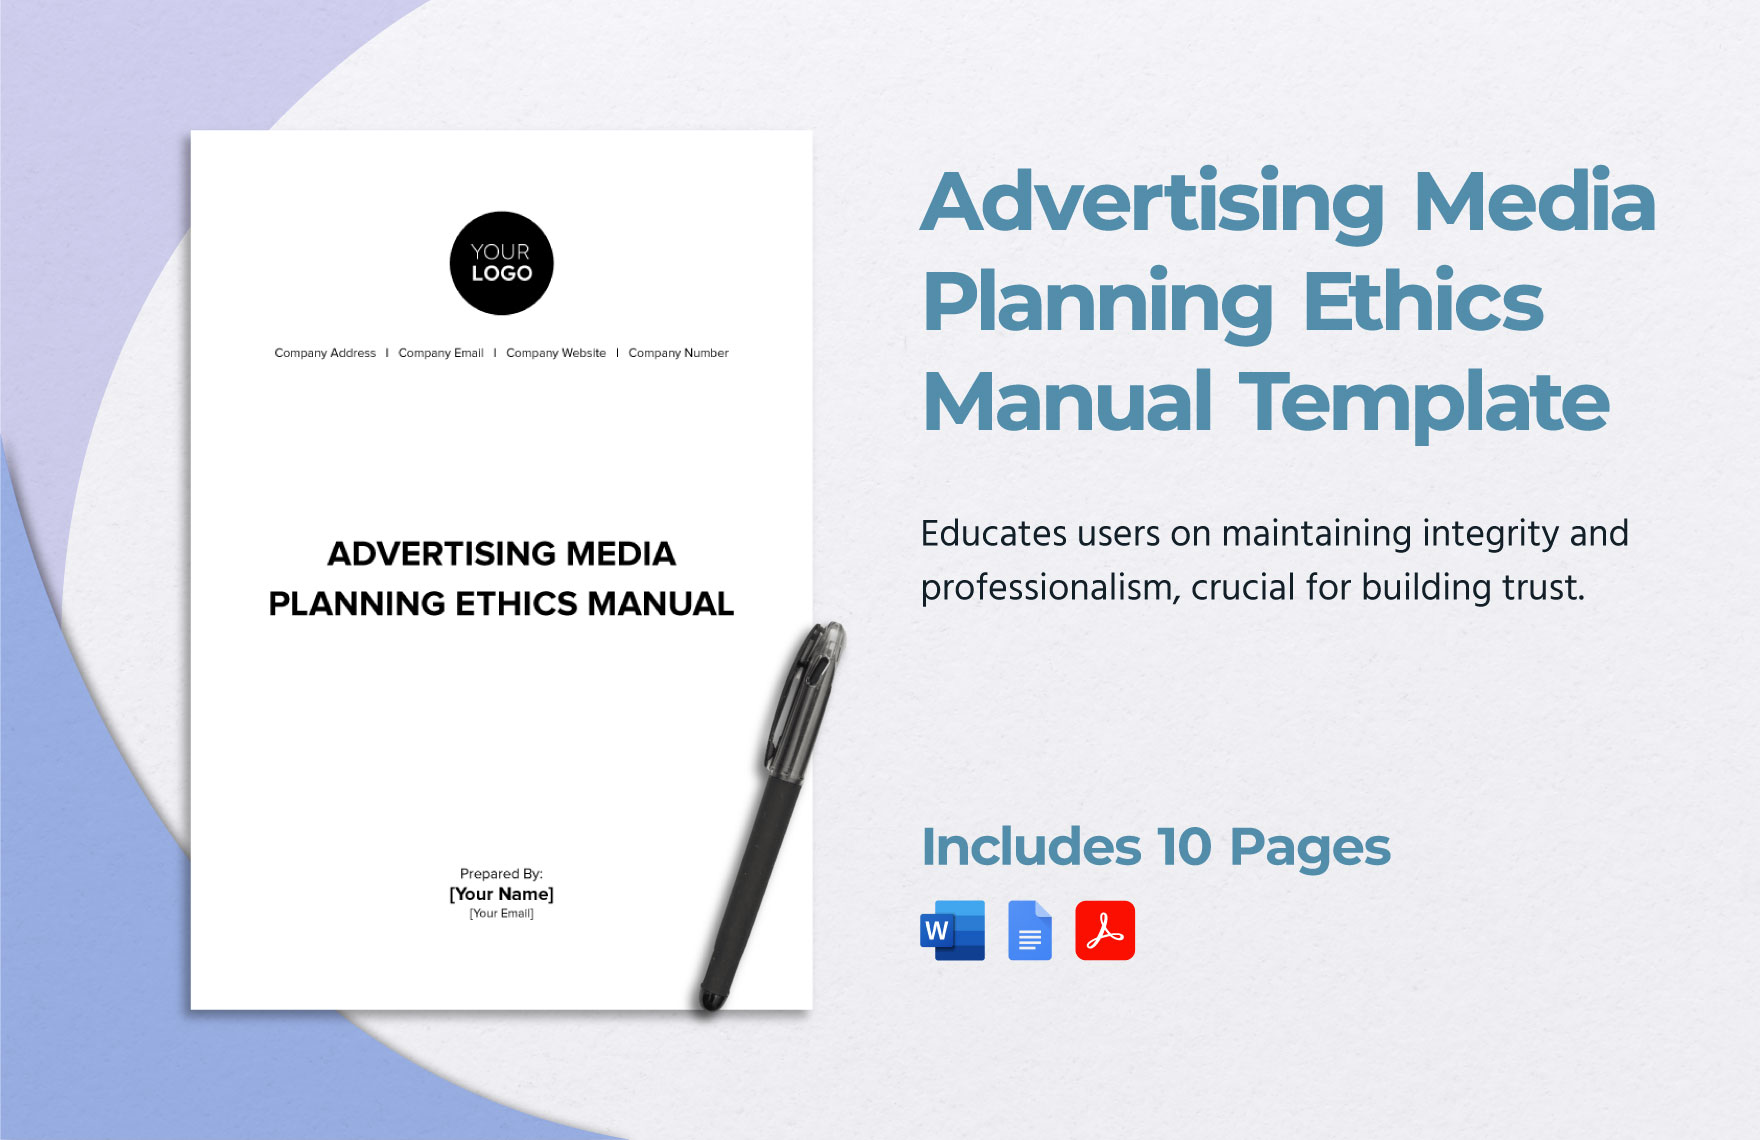 Advertising Media Planning Ethics Manual Template